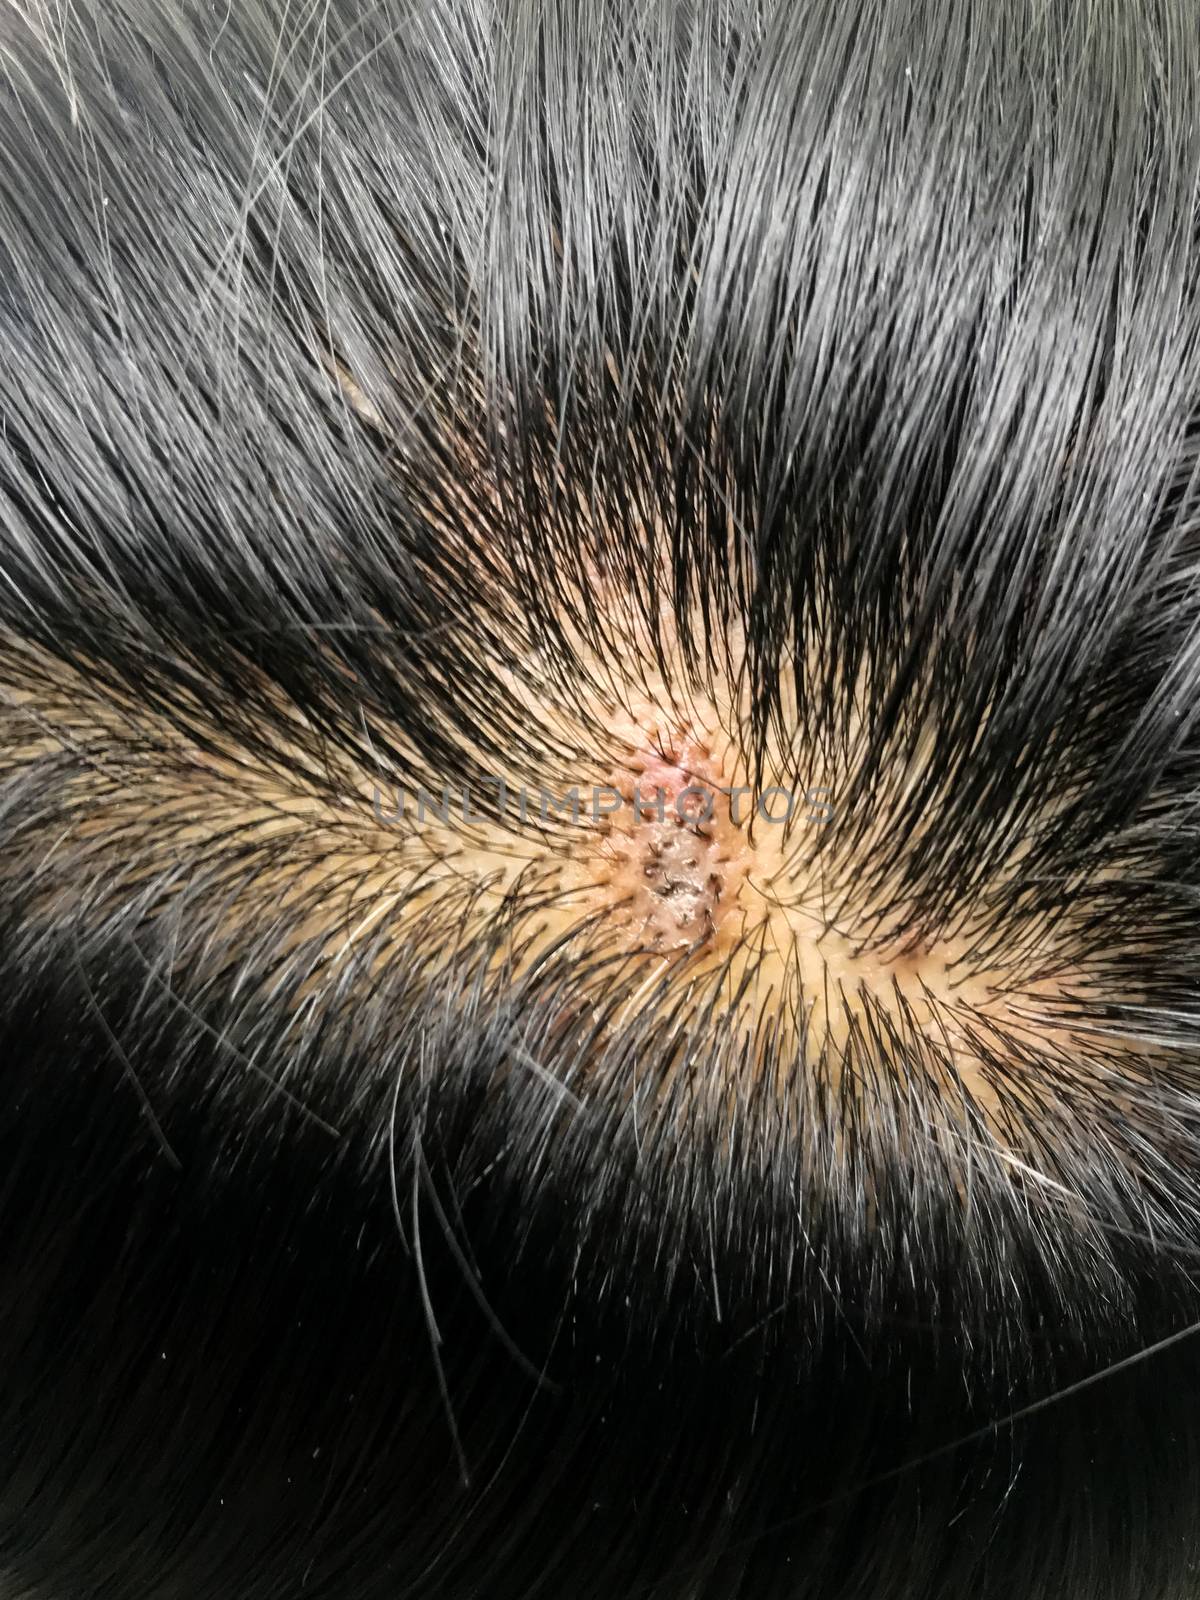 Close-up of black hair of Asians with hair and mold health problems on scalp.